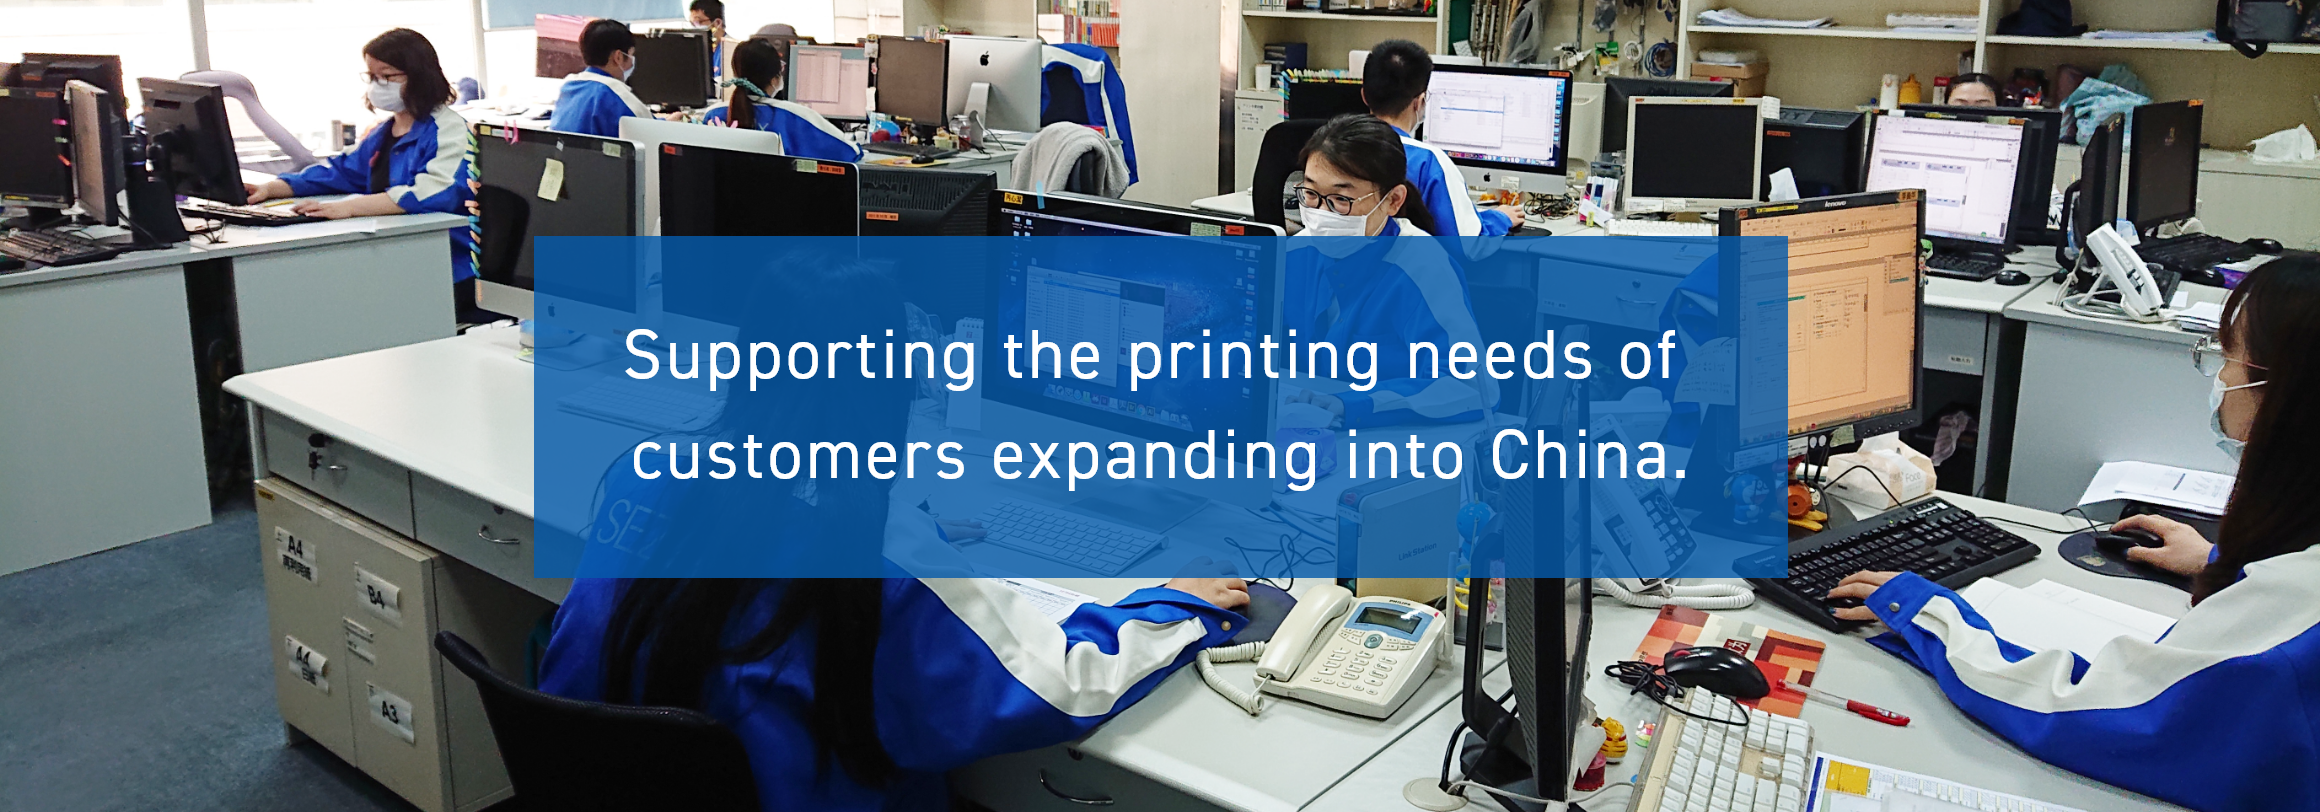 Supporting the printing needs of customers expanding into China.